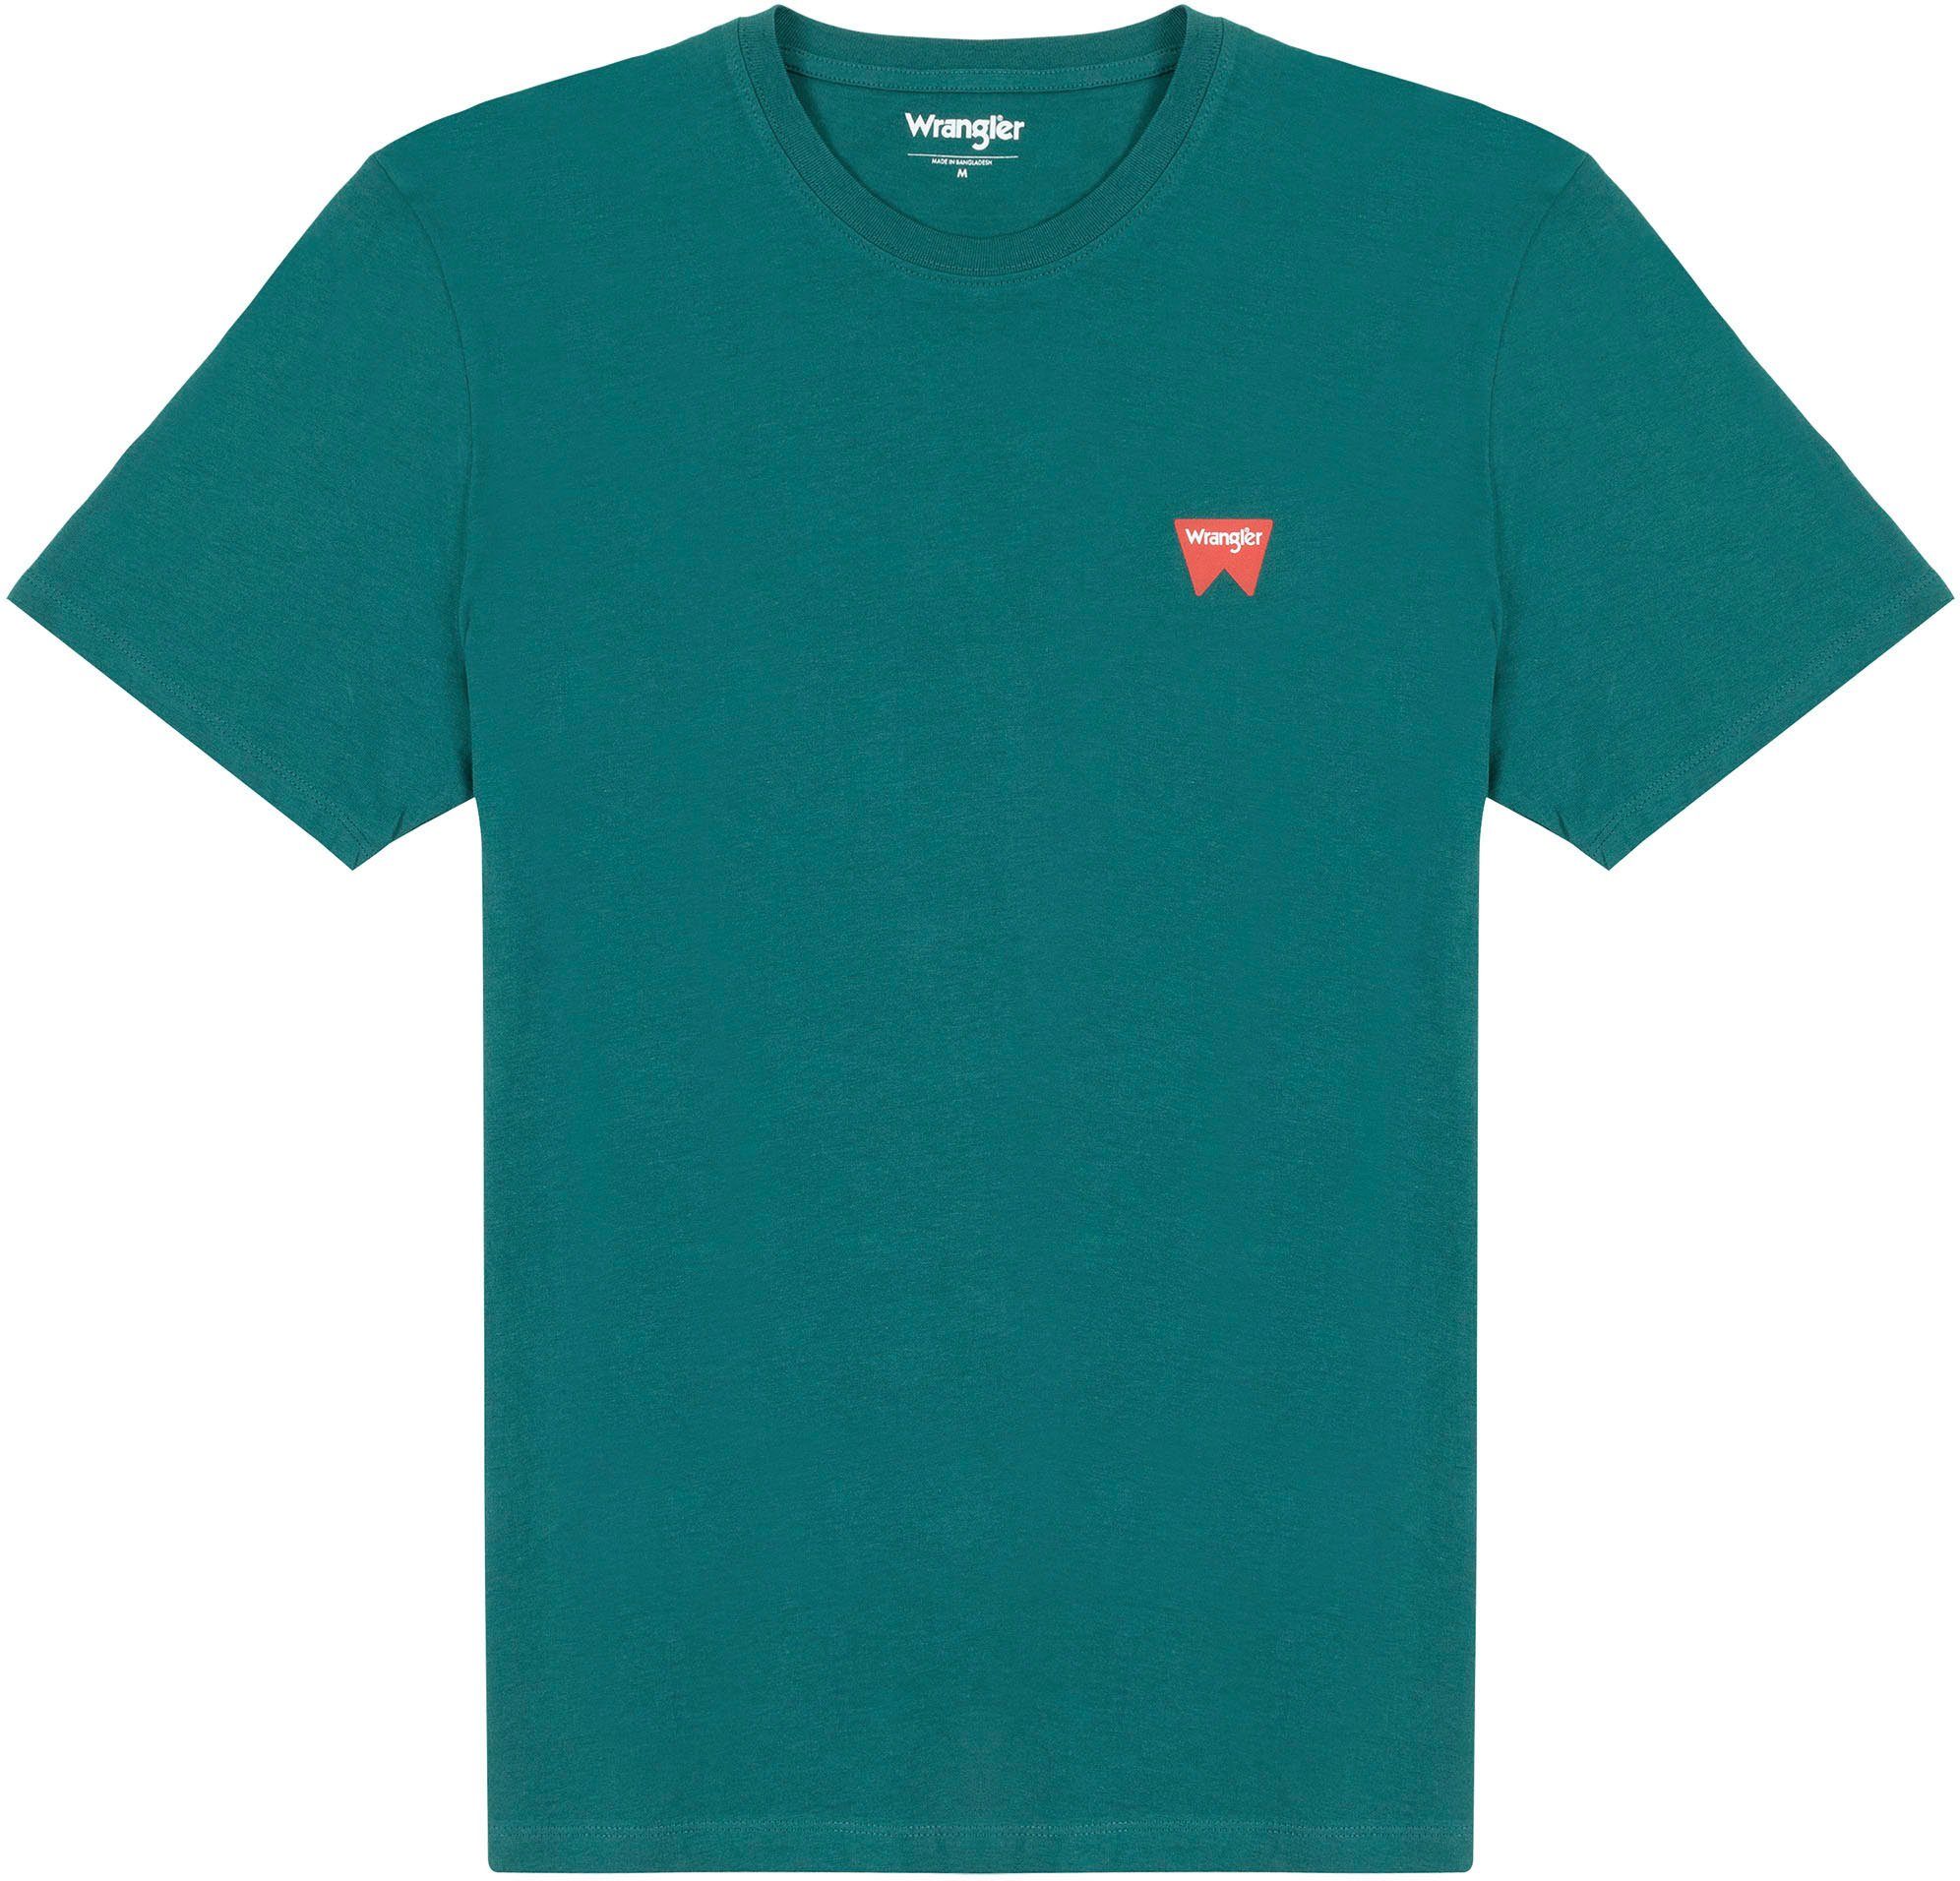 Wrangler T-Shirt bayberry Sign-Off green